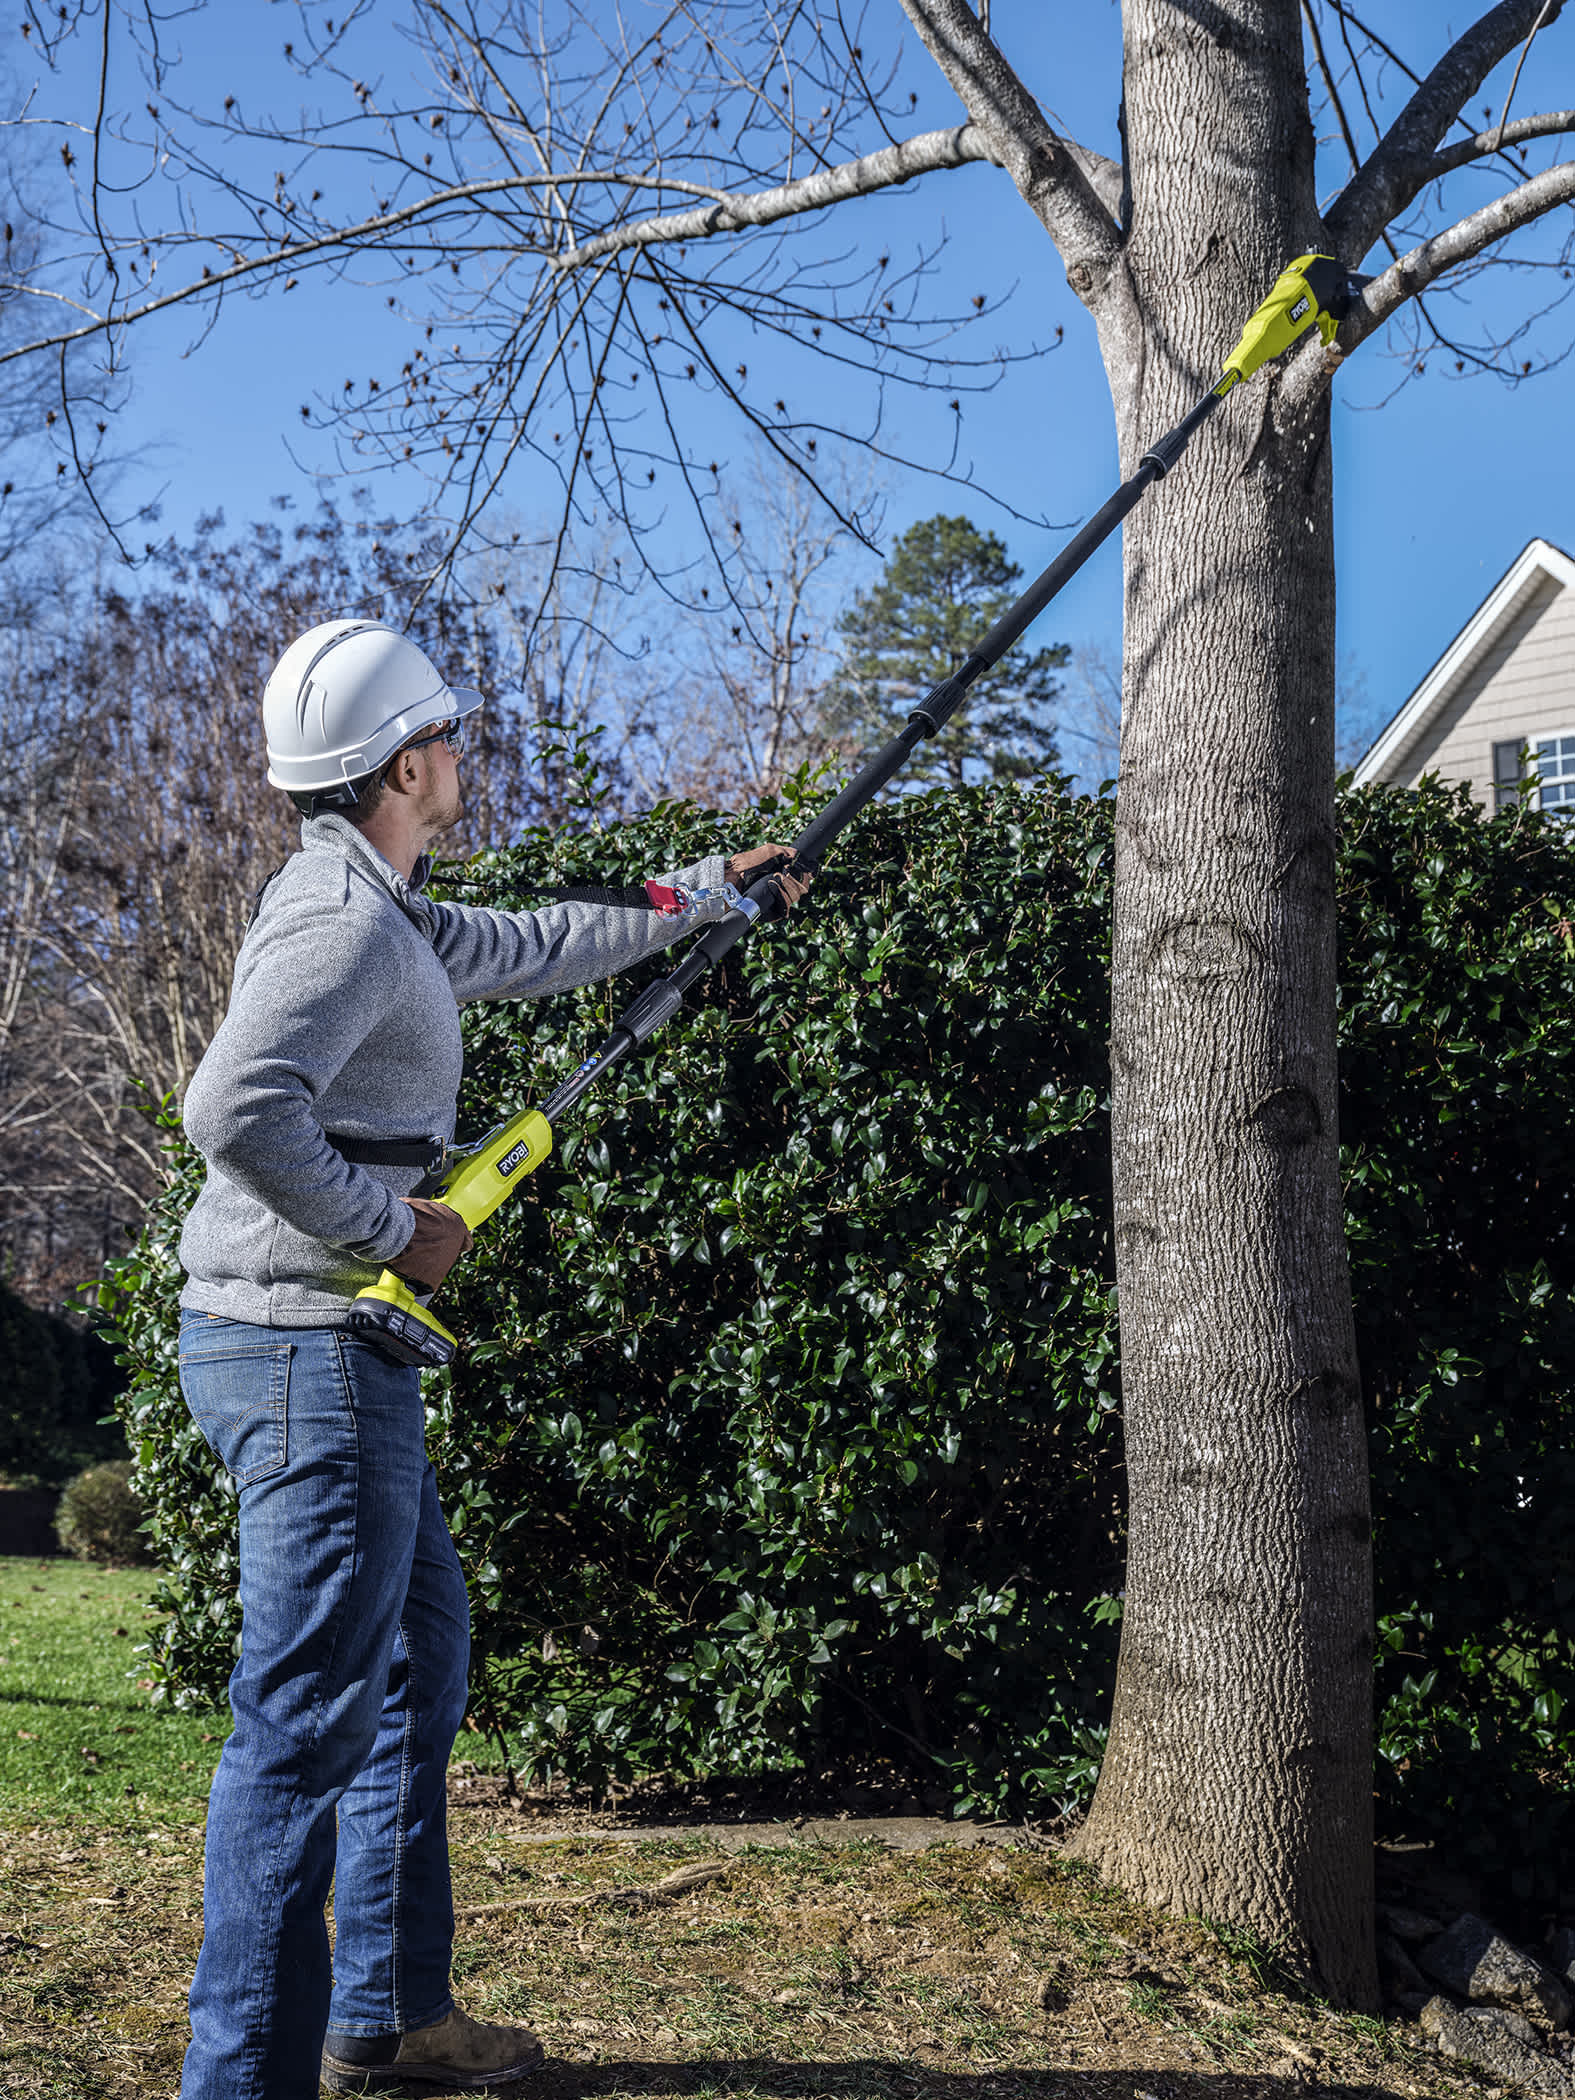 Product Features Image for 18V ONE+ HP Brushless Cordless Whisper-Series 8-inch Pole Saw (Tool-Only).